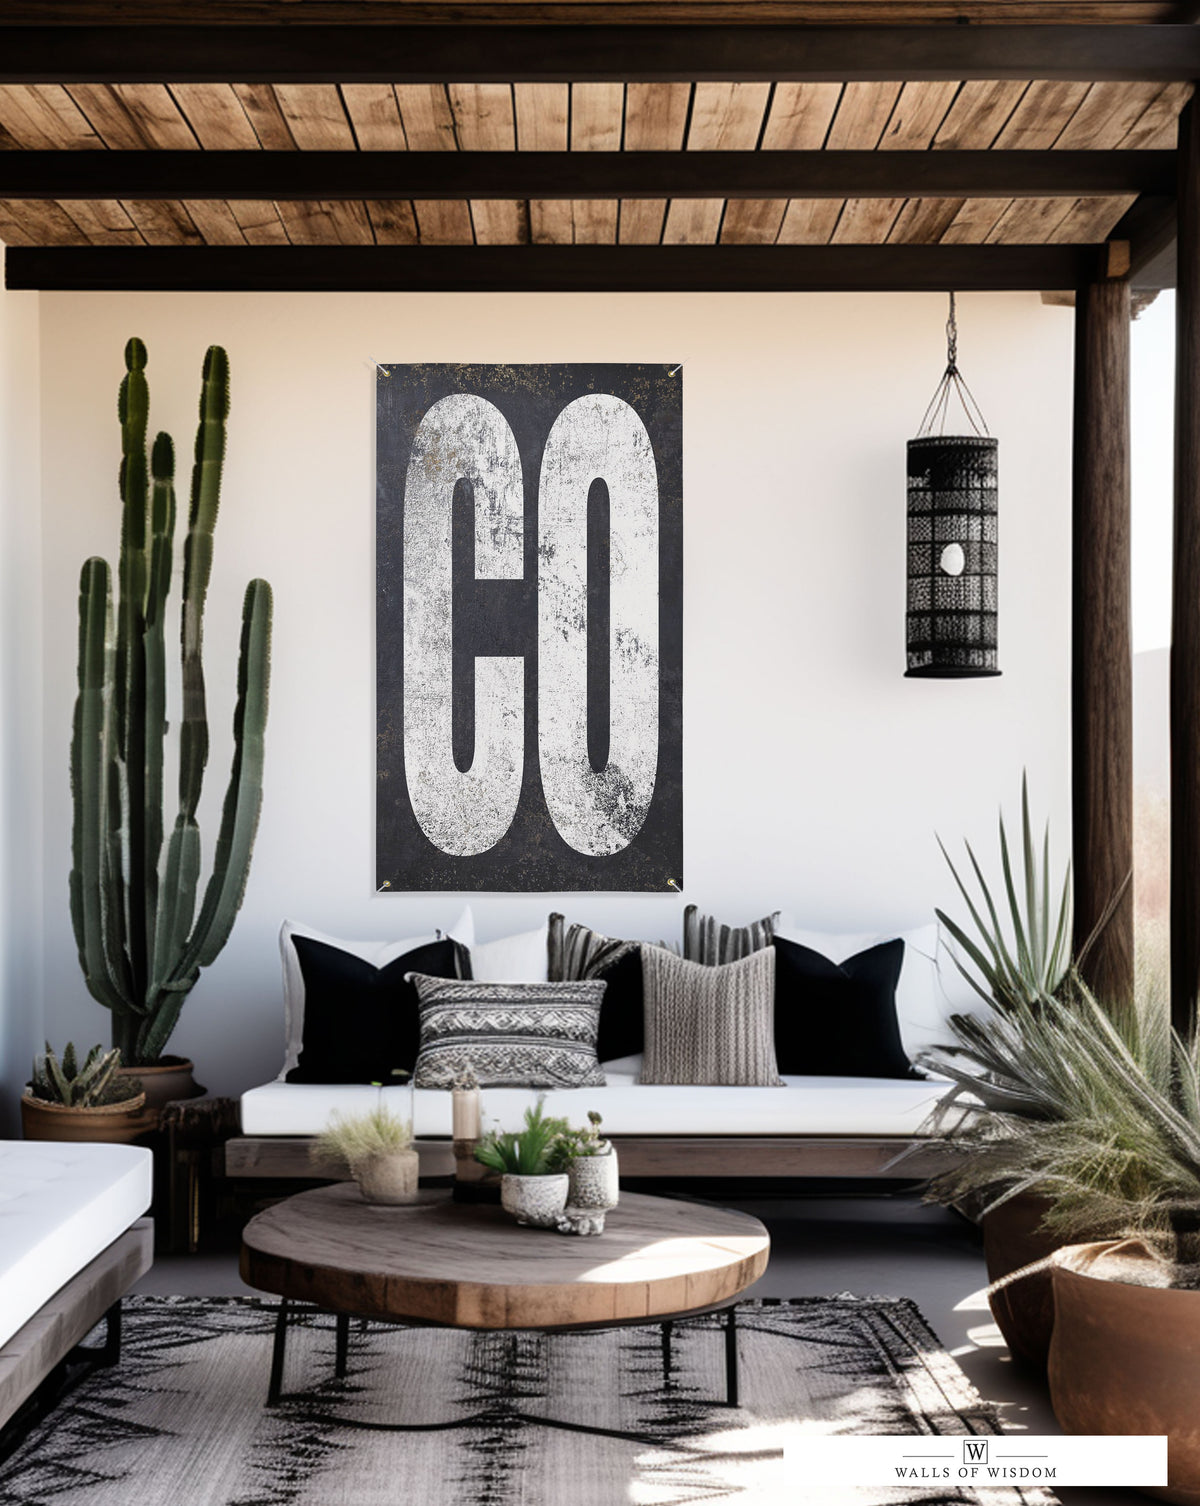 Rustic 'CO' backyard bar grill art on a weatherproof vinyl banner, capturing the essence of Colorado outdoor living